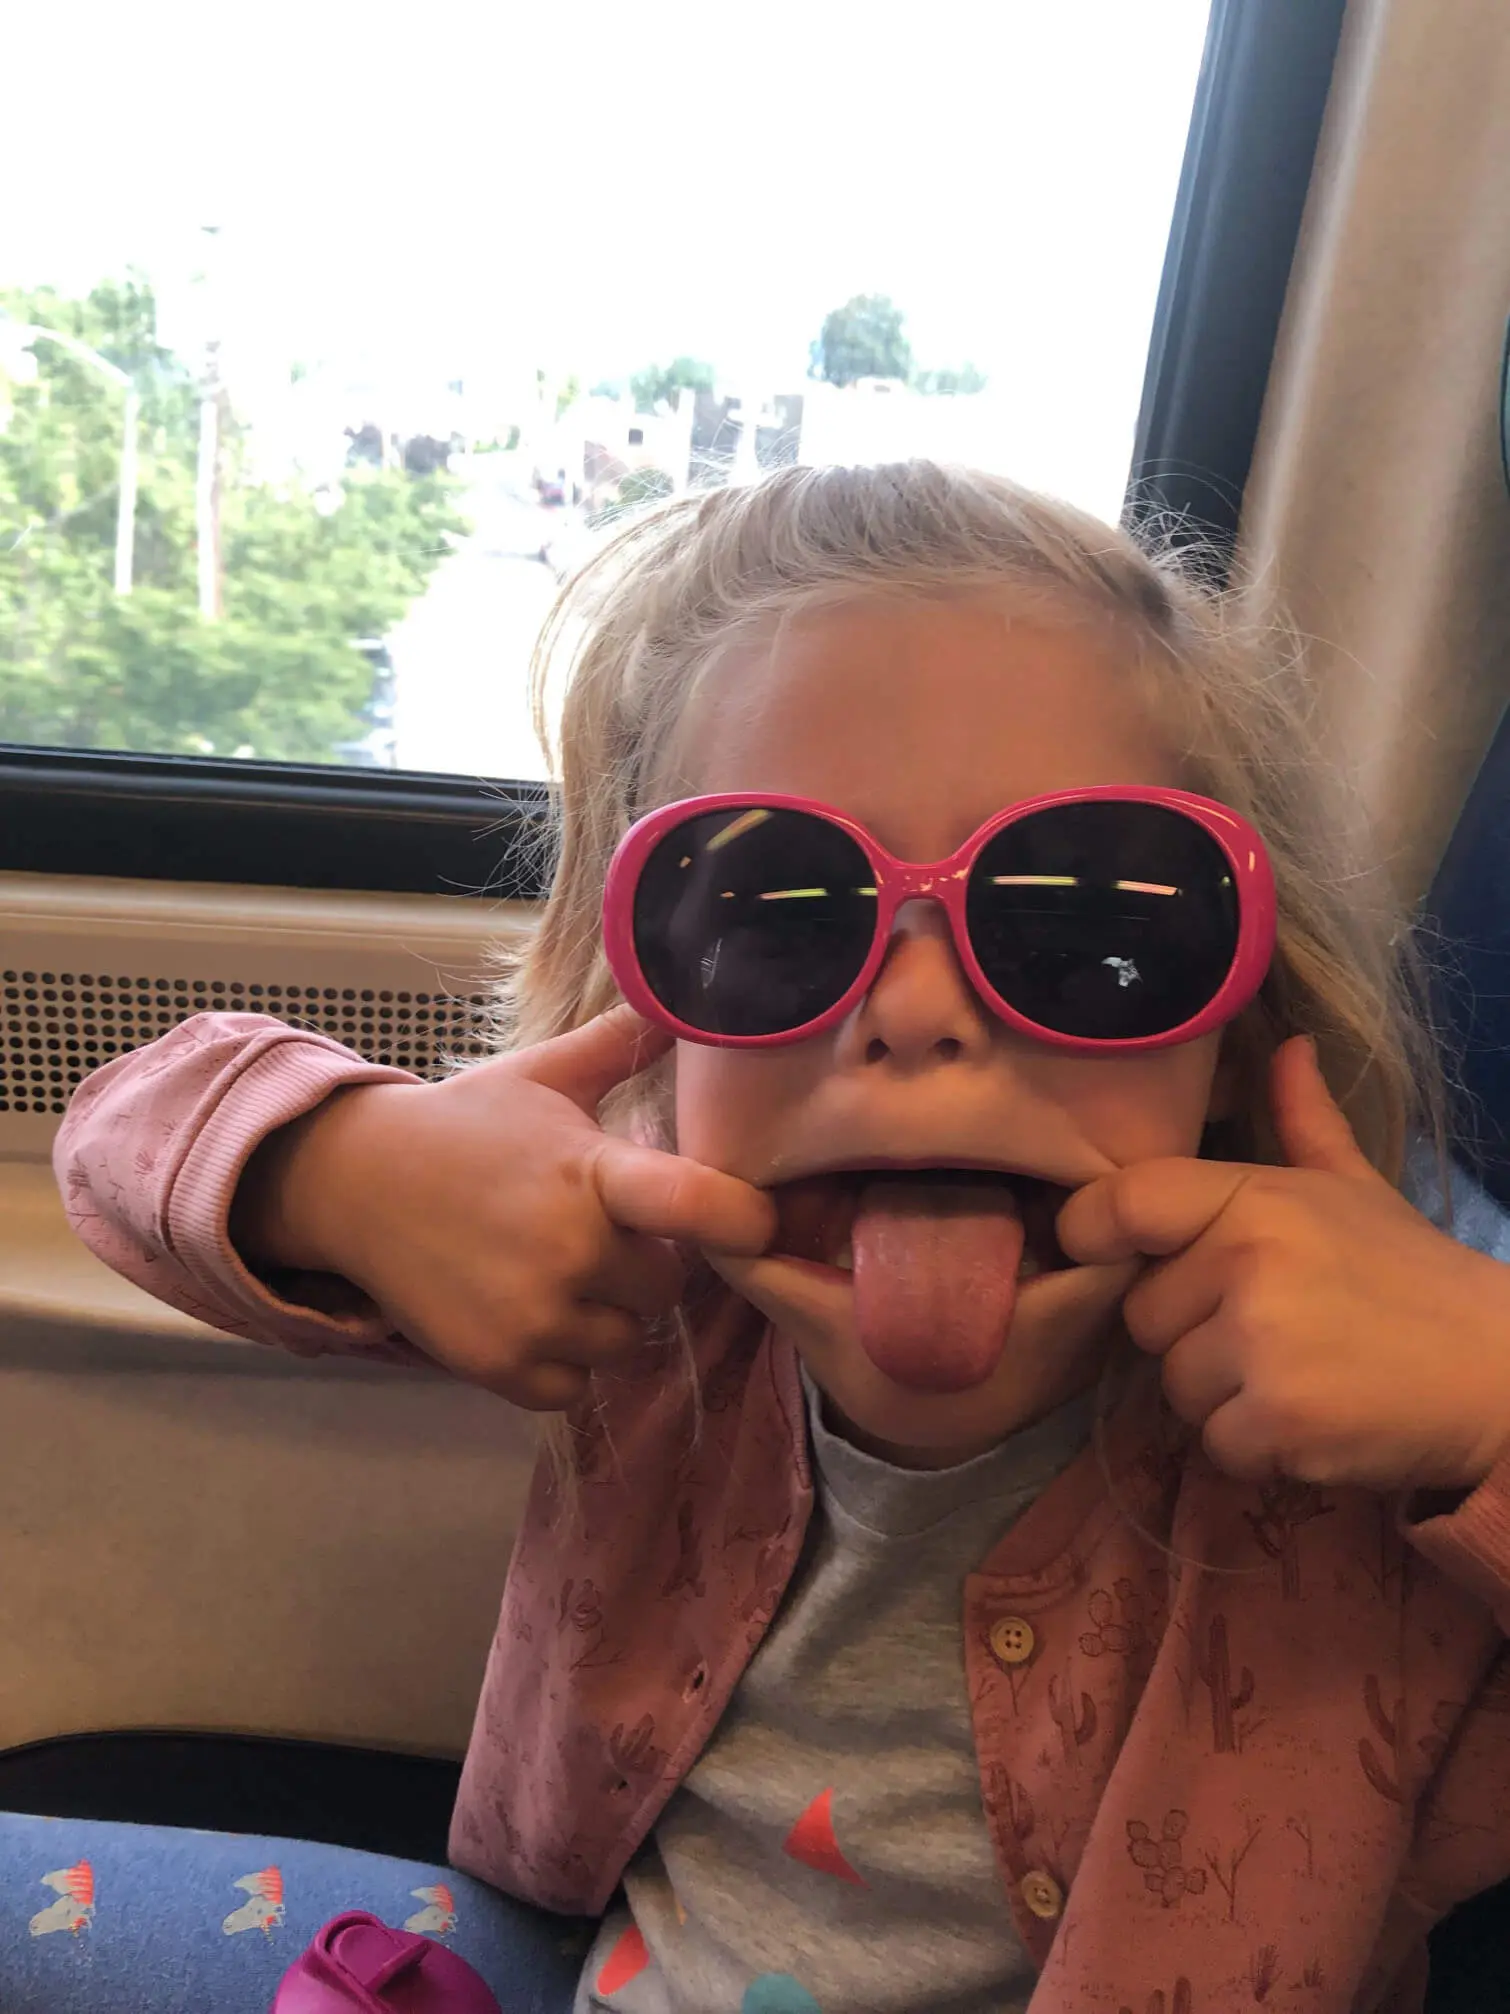 Young girl on a train, wearing sunglasses and making a silly face.